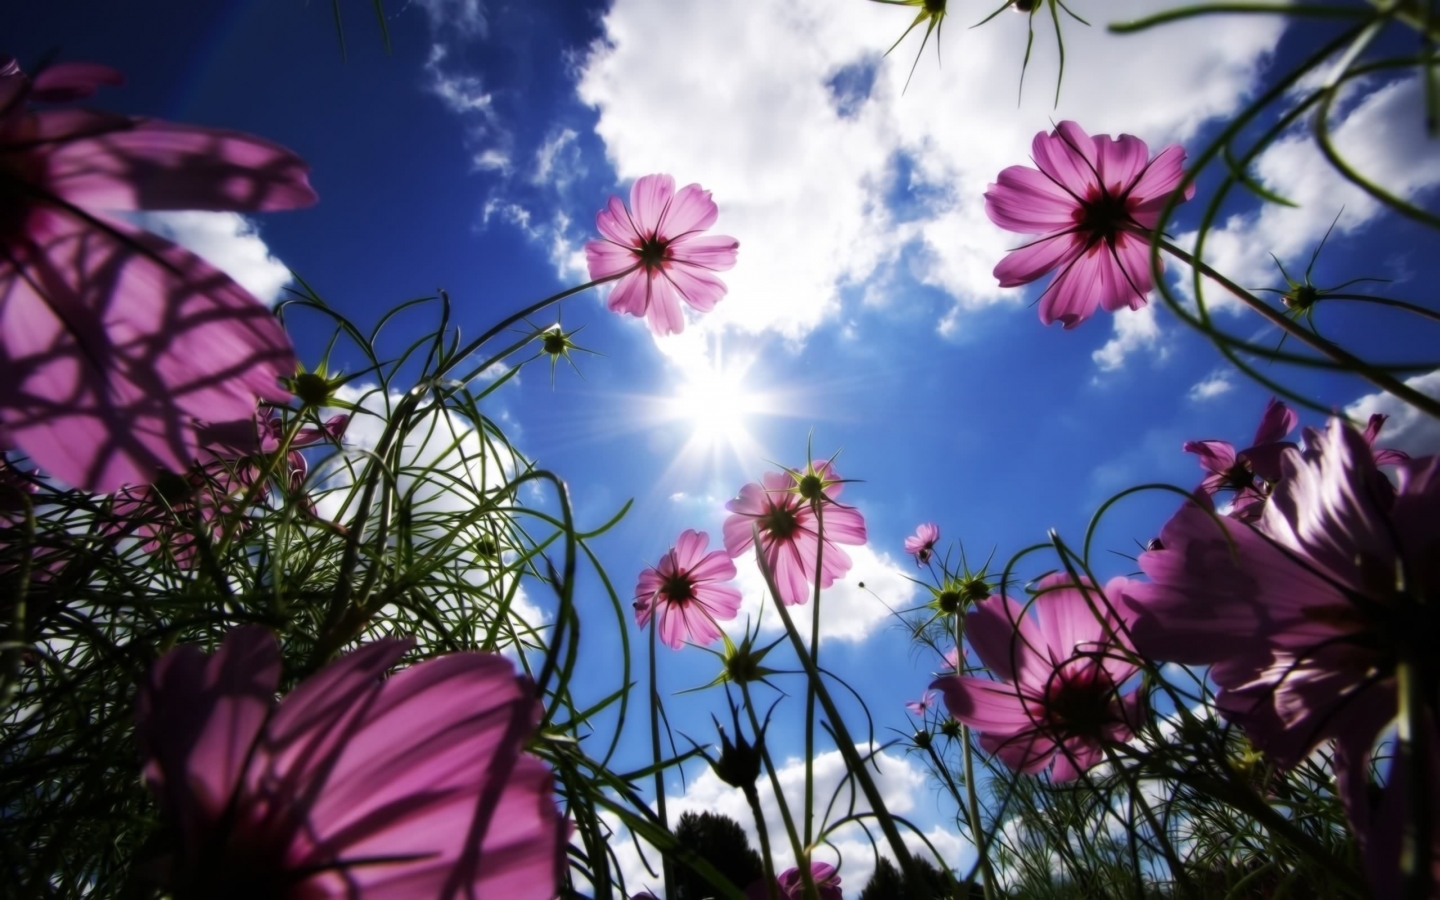 Flowers under the sun for 1440 x 900 widescreen resolution